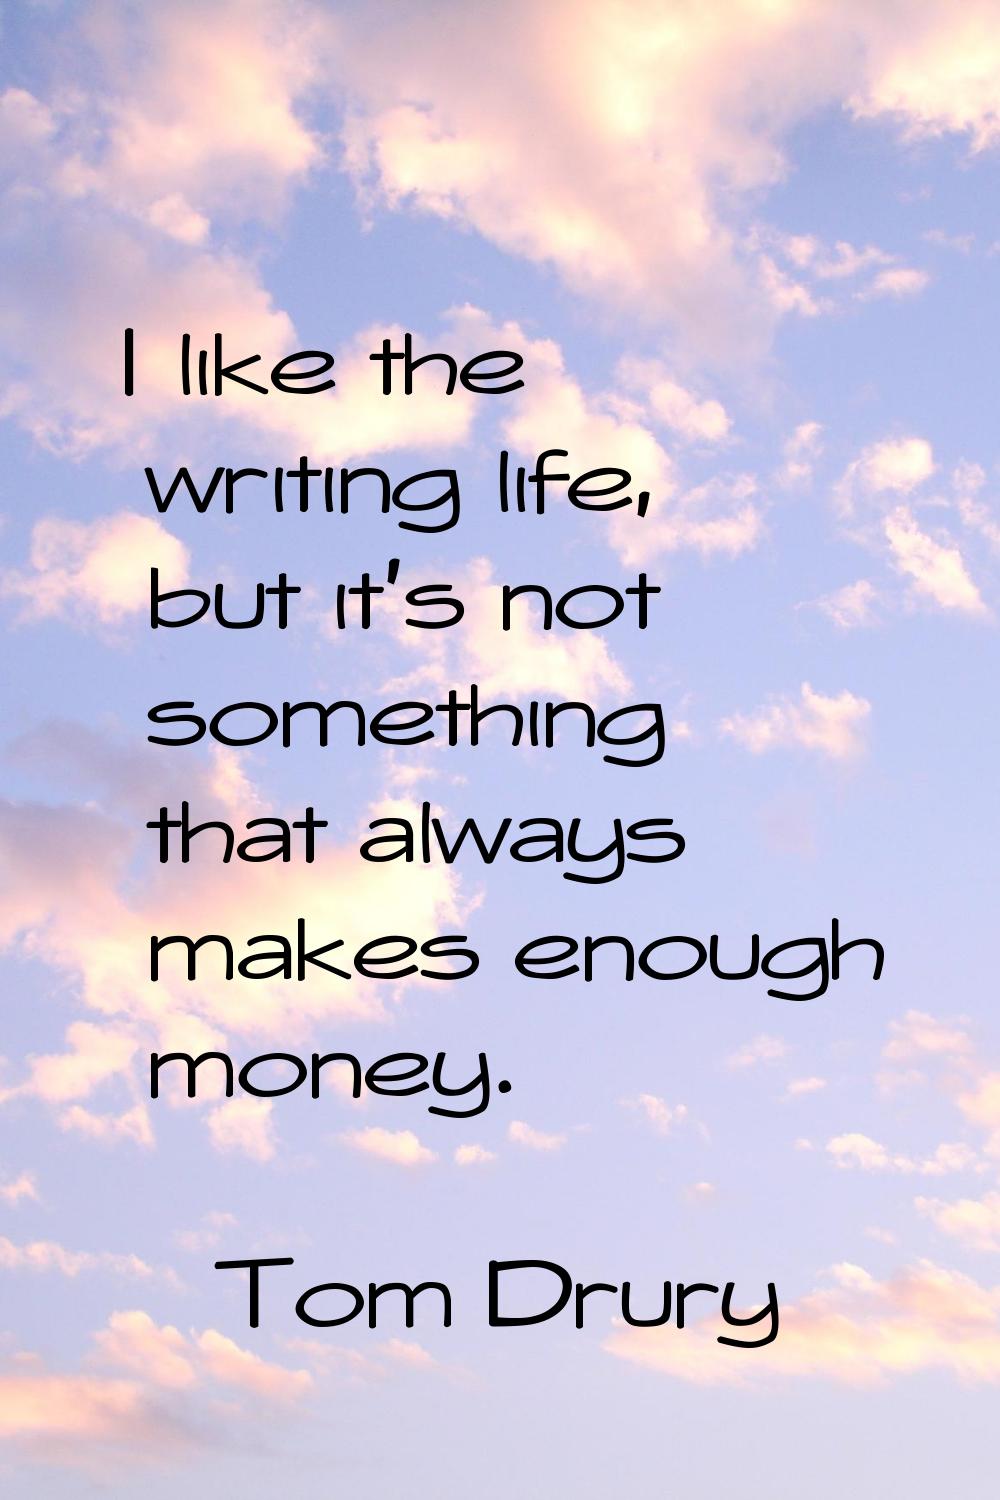 I like the writing life, but it's not something that always makes enough money.